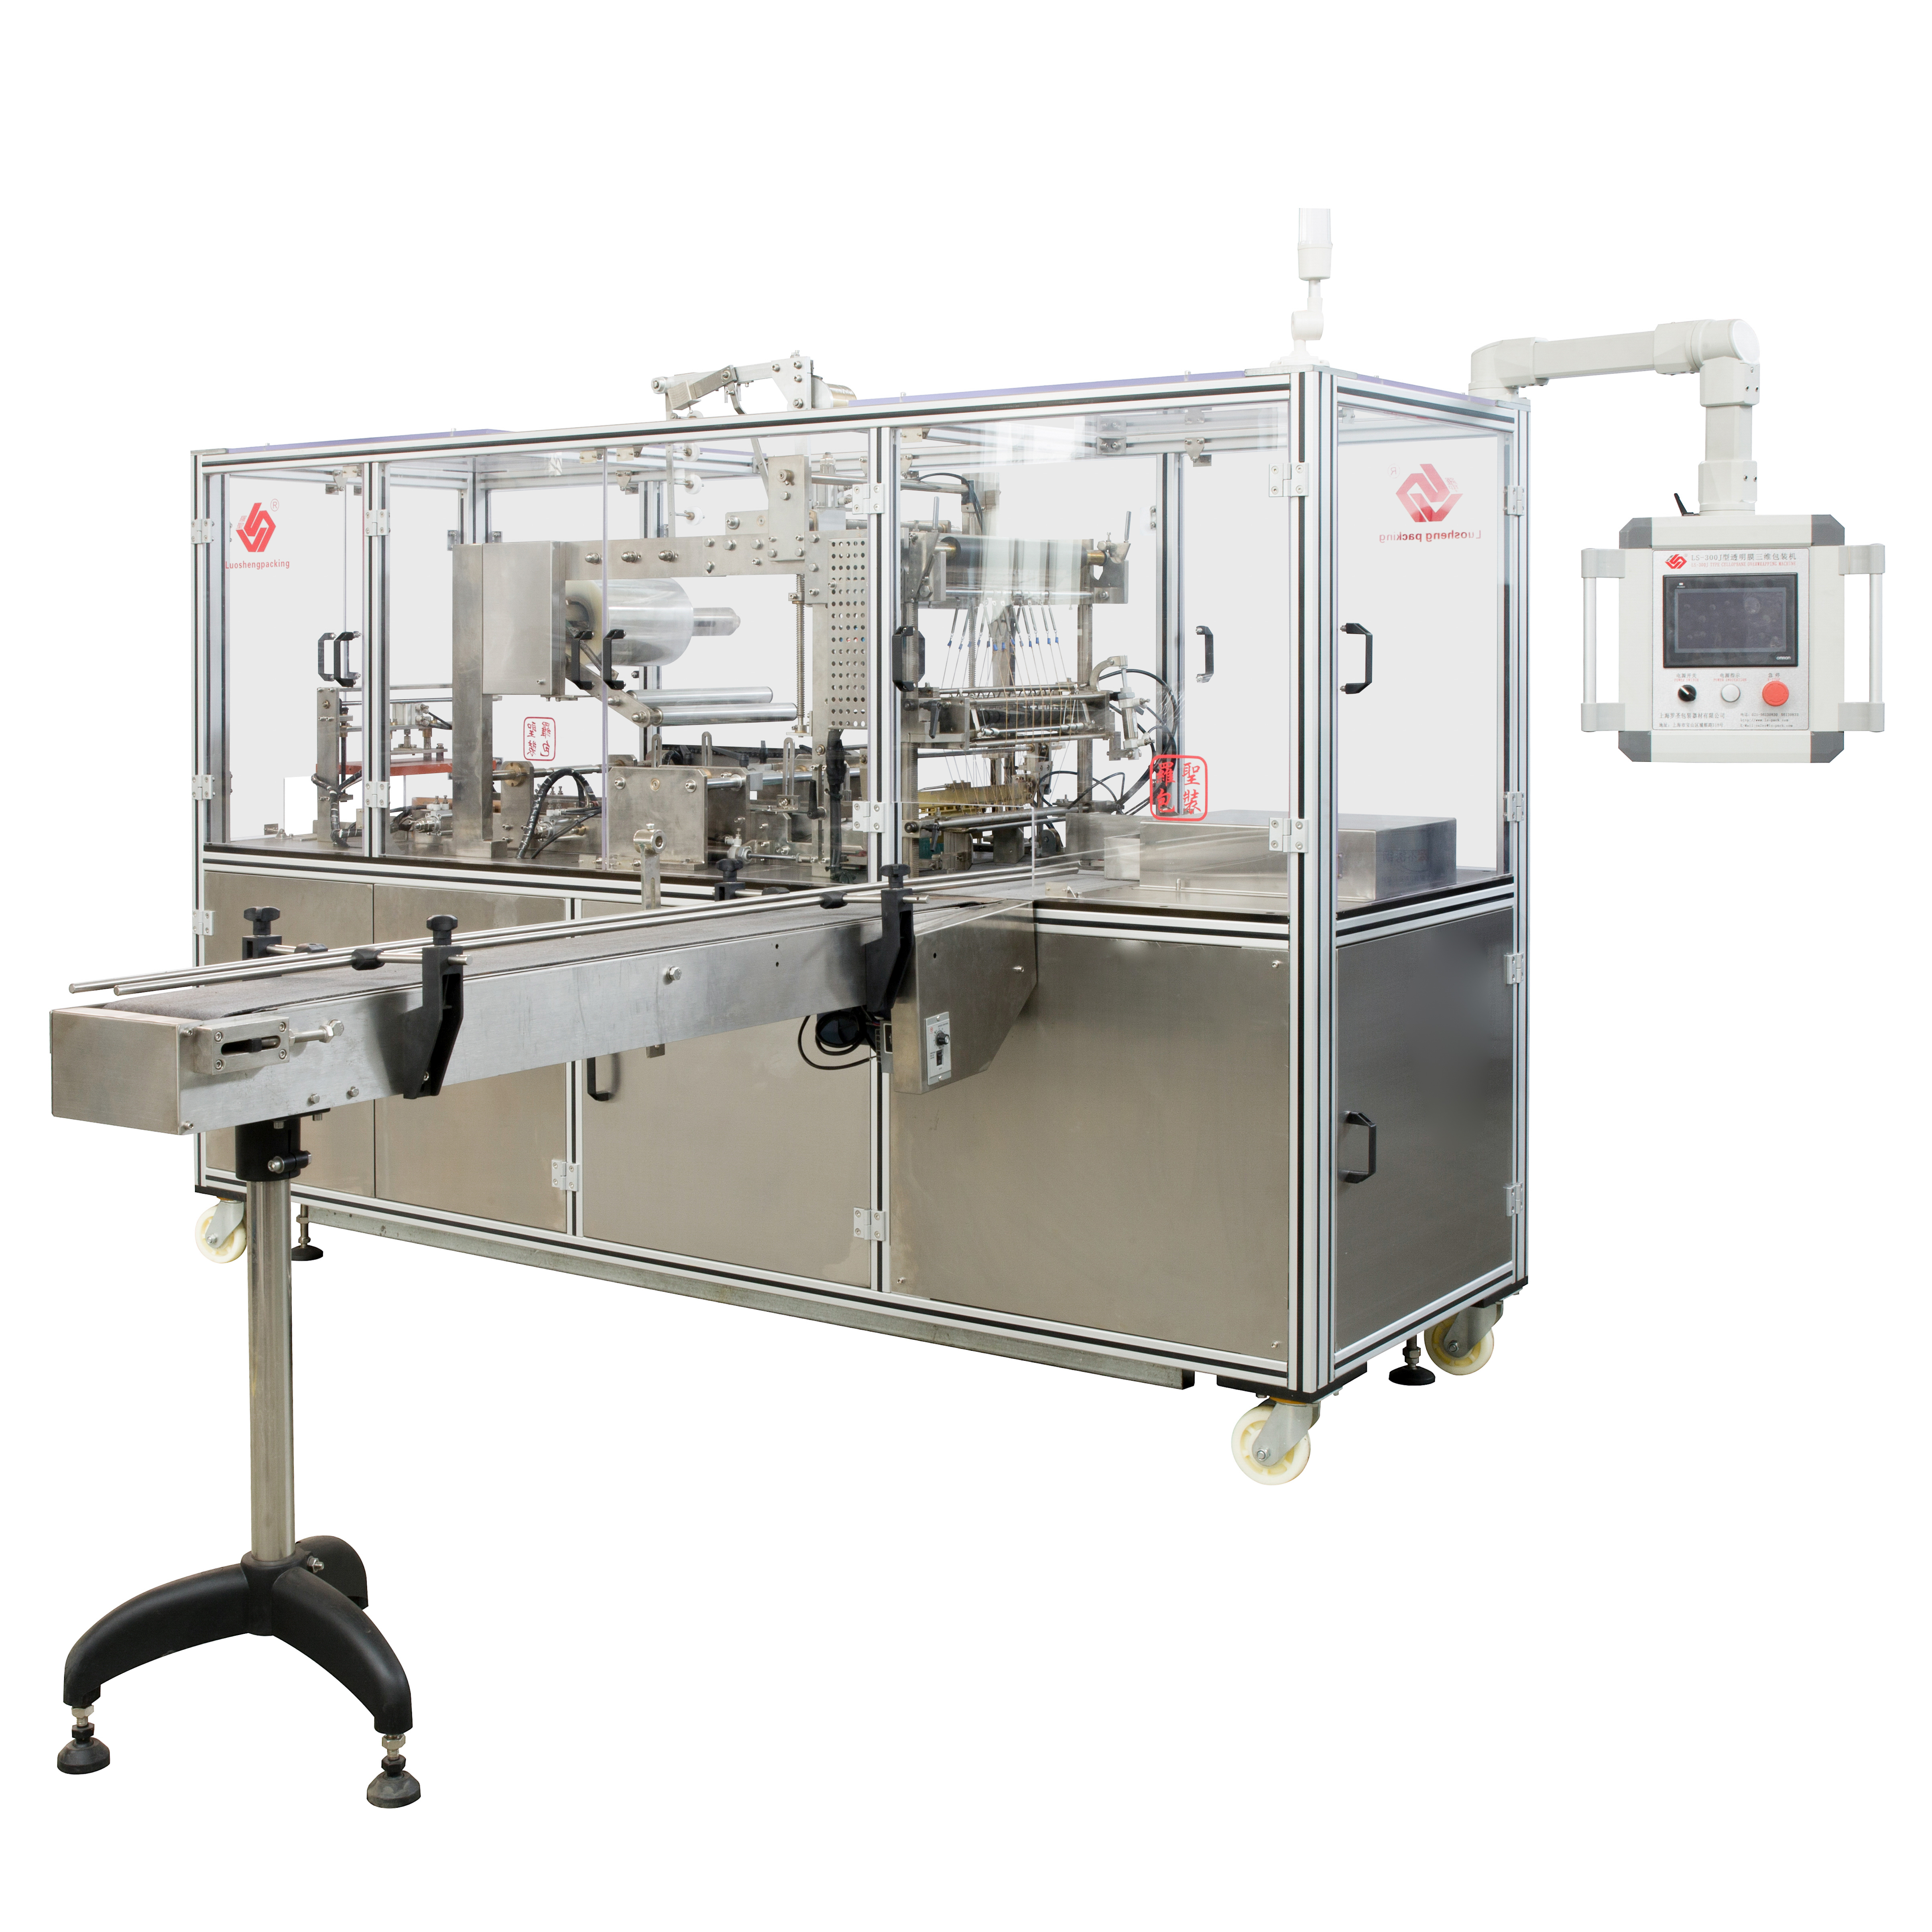 Transparent film overwrapping machine for mask box.mp4